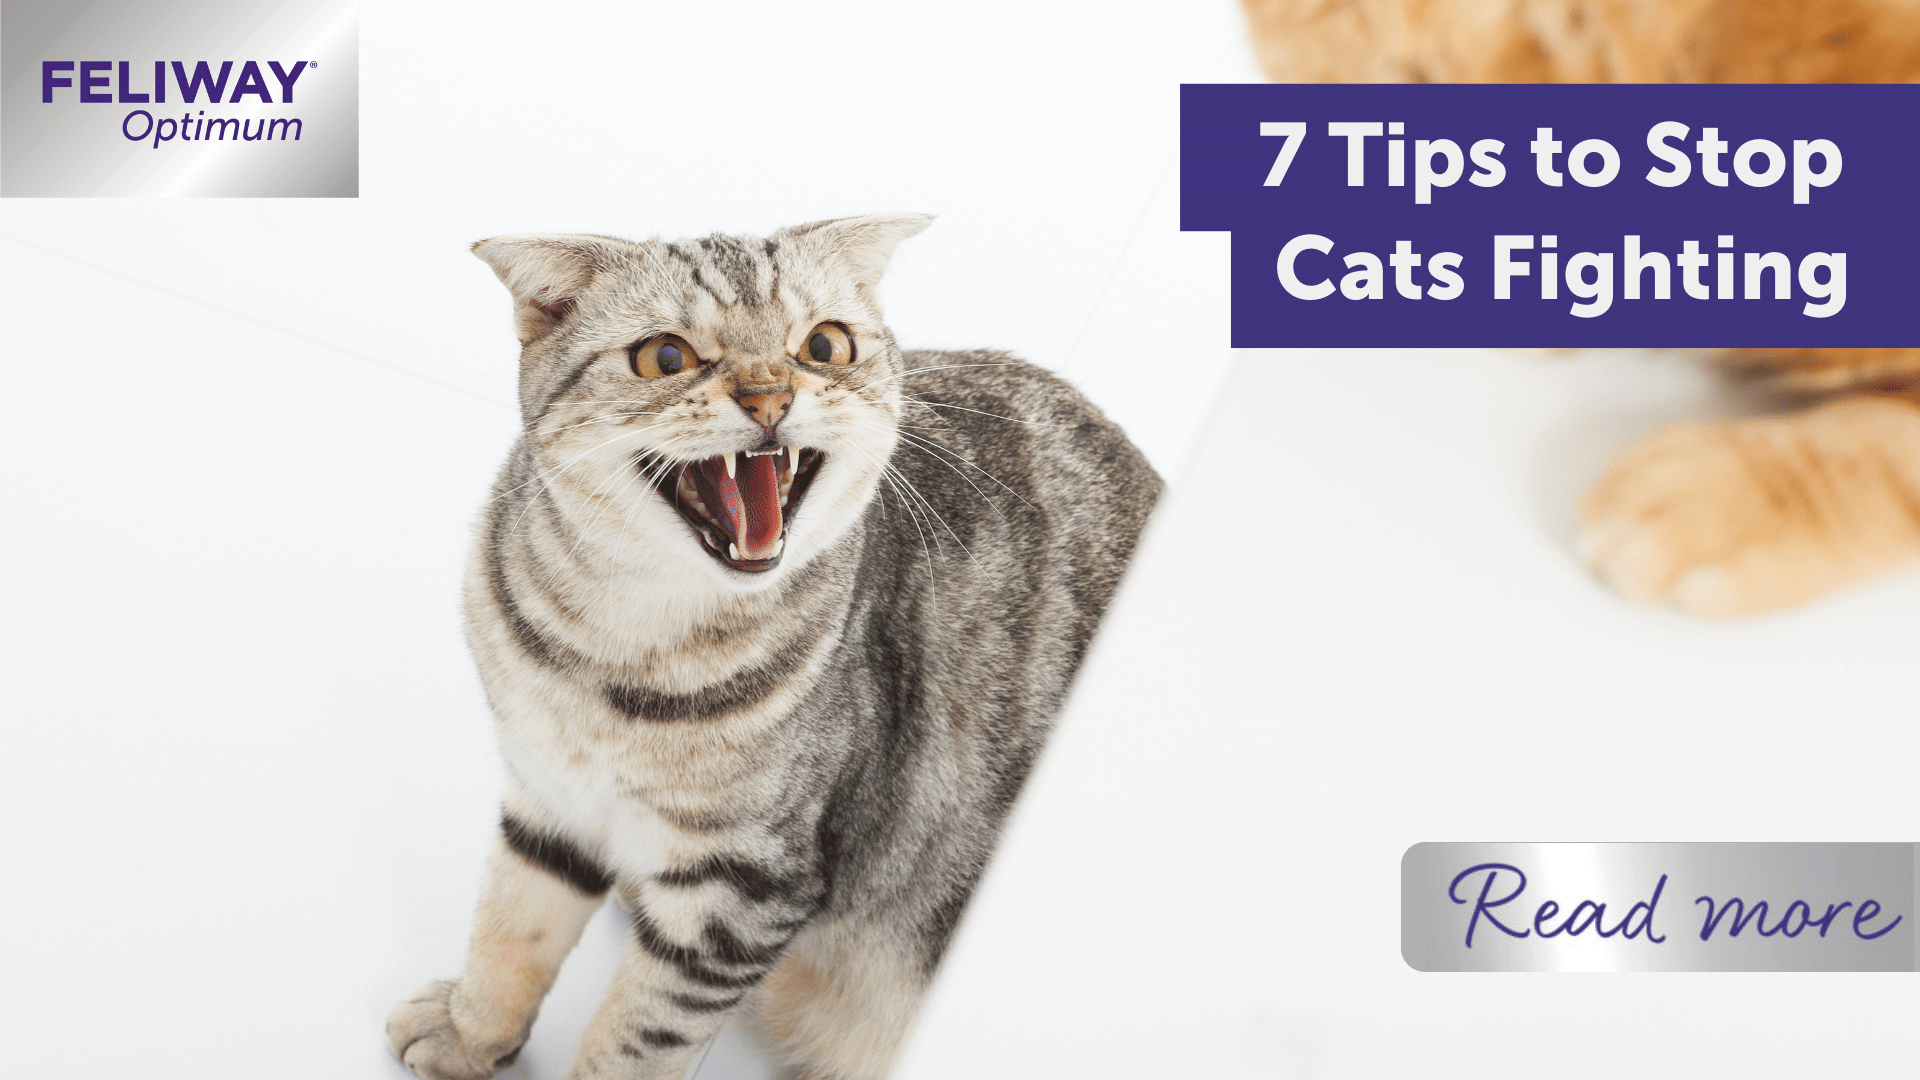 7 Tips to Stop Cats Fighting